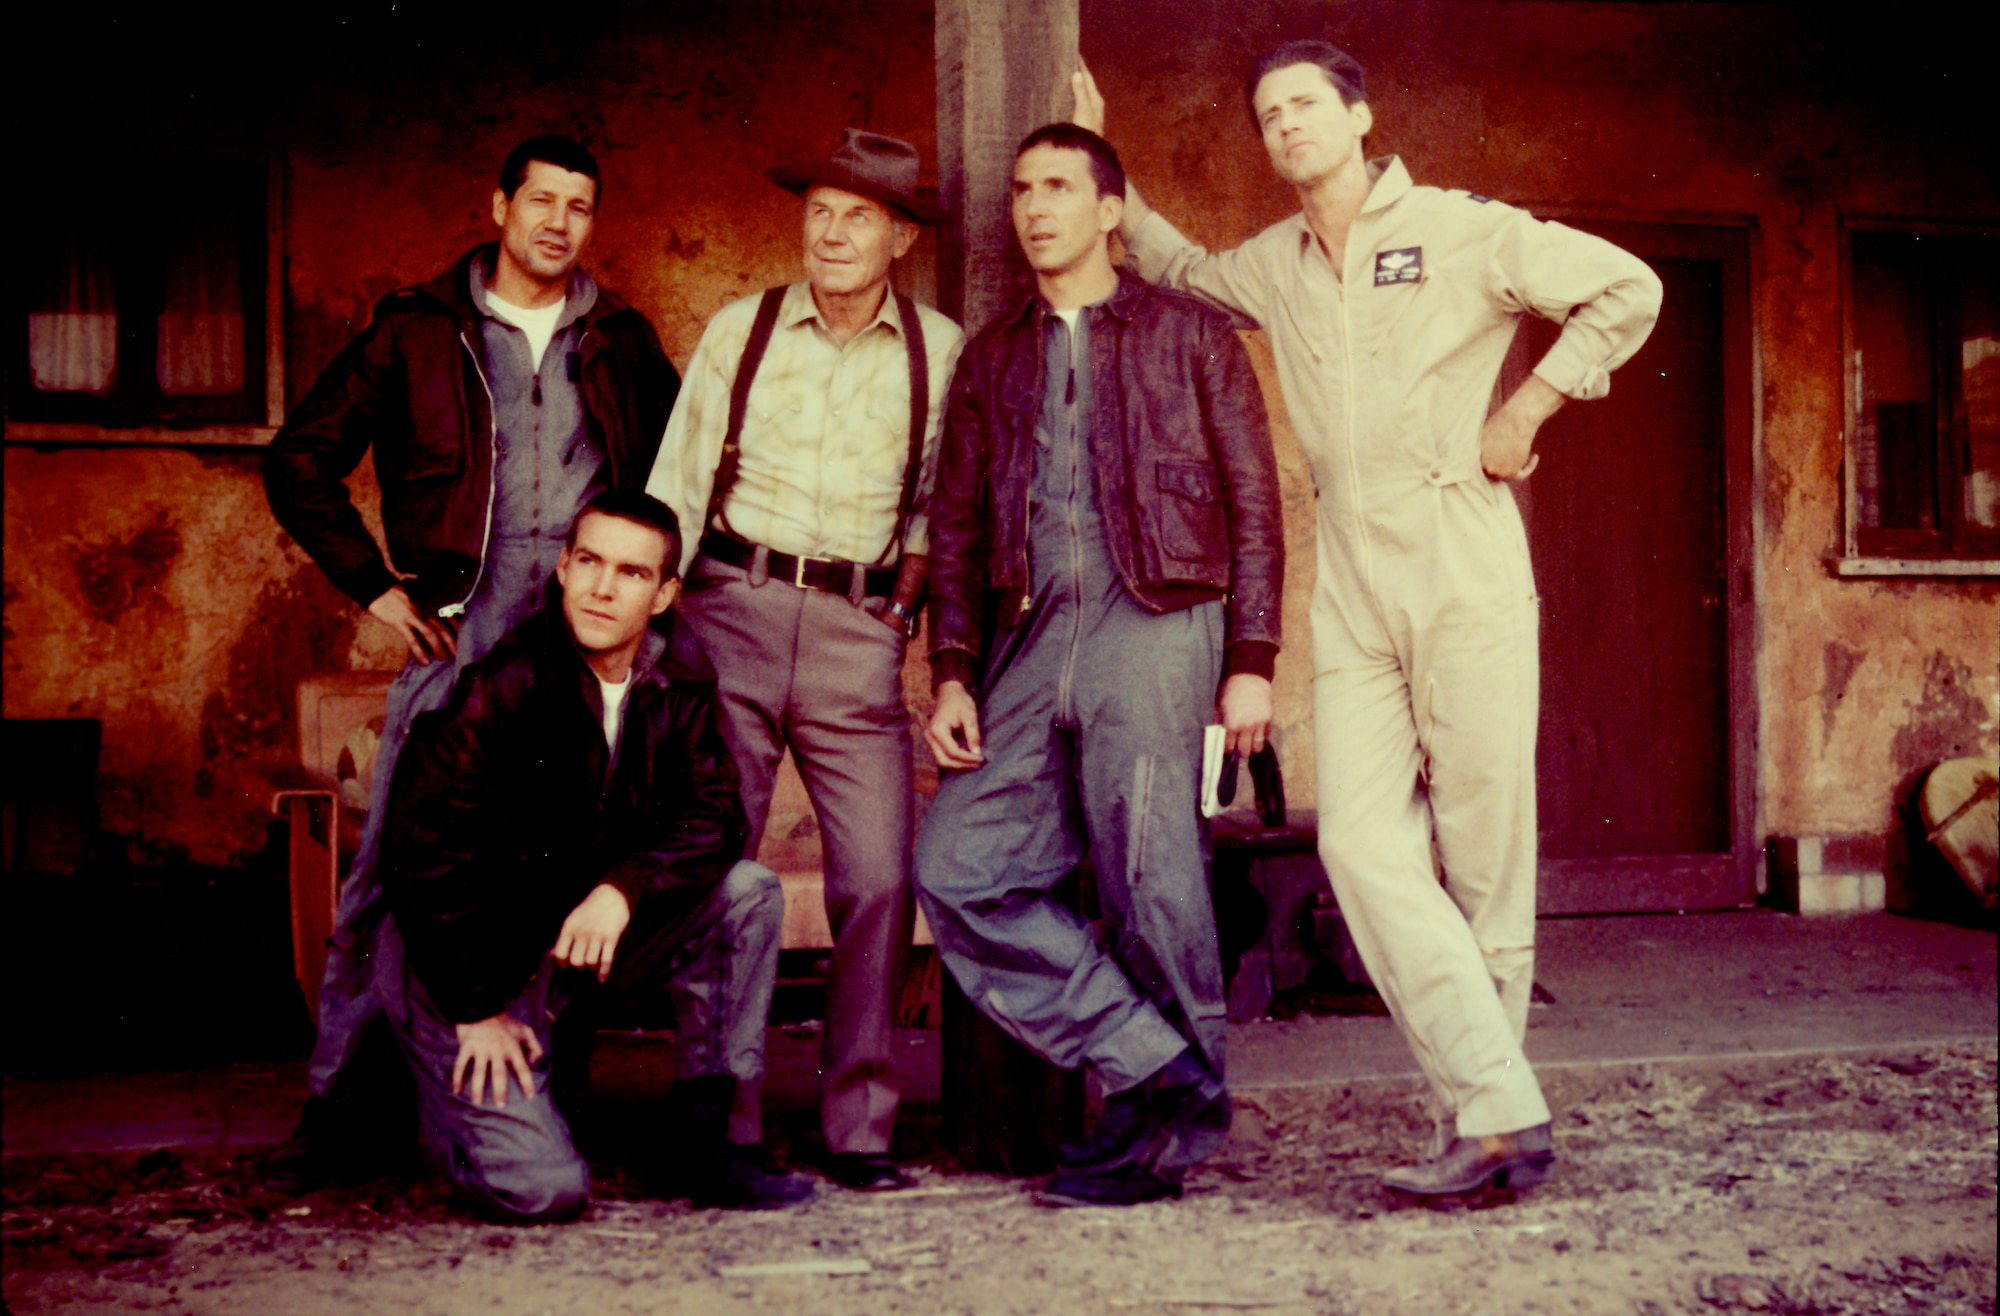 Brig. Gen. (retired) Chuck Yeager poses for a photo with the cast of the film "The Right Stuff" at Edwards Air Force Base in 1982. Yeager played the bartender "Fred" during a cameo appearance in the film. (Photo courtesy of Air Force Test Center History Office)